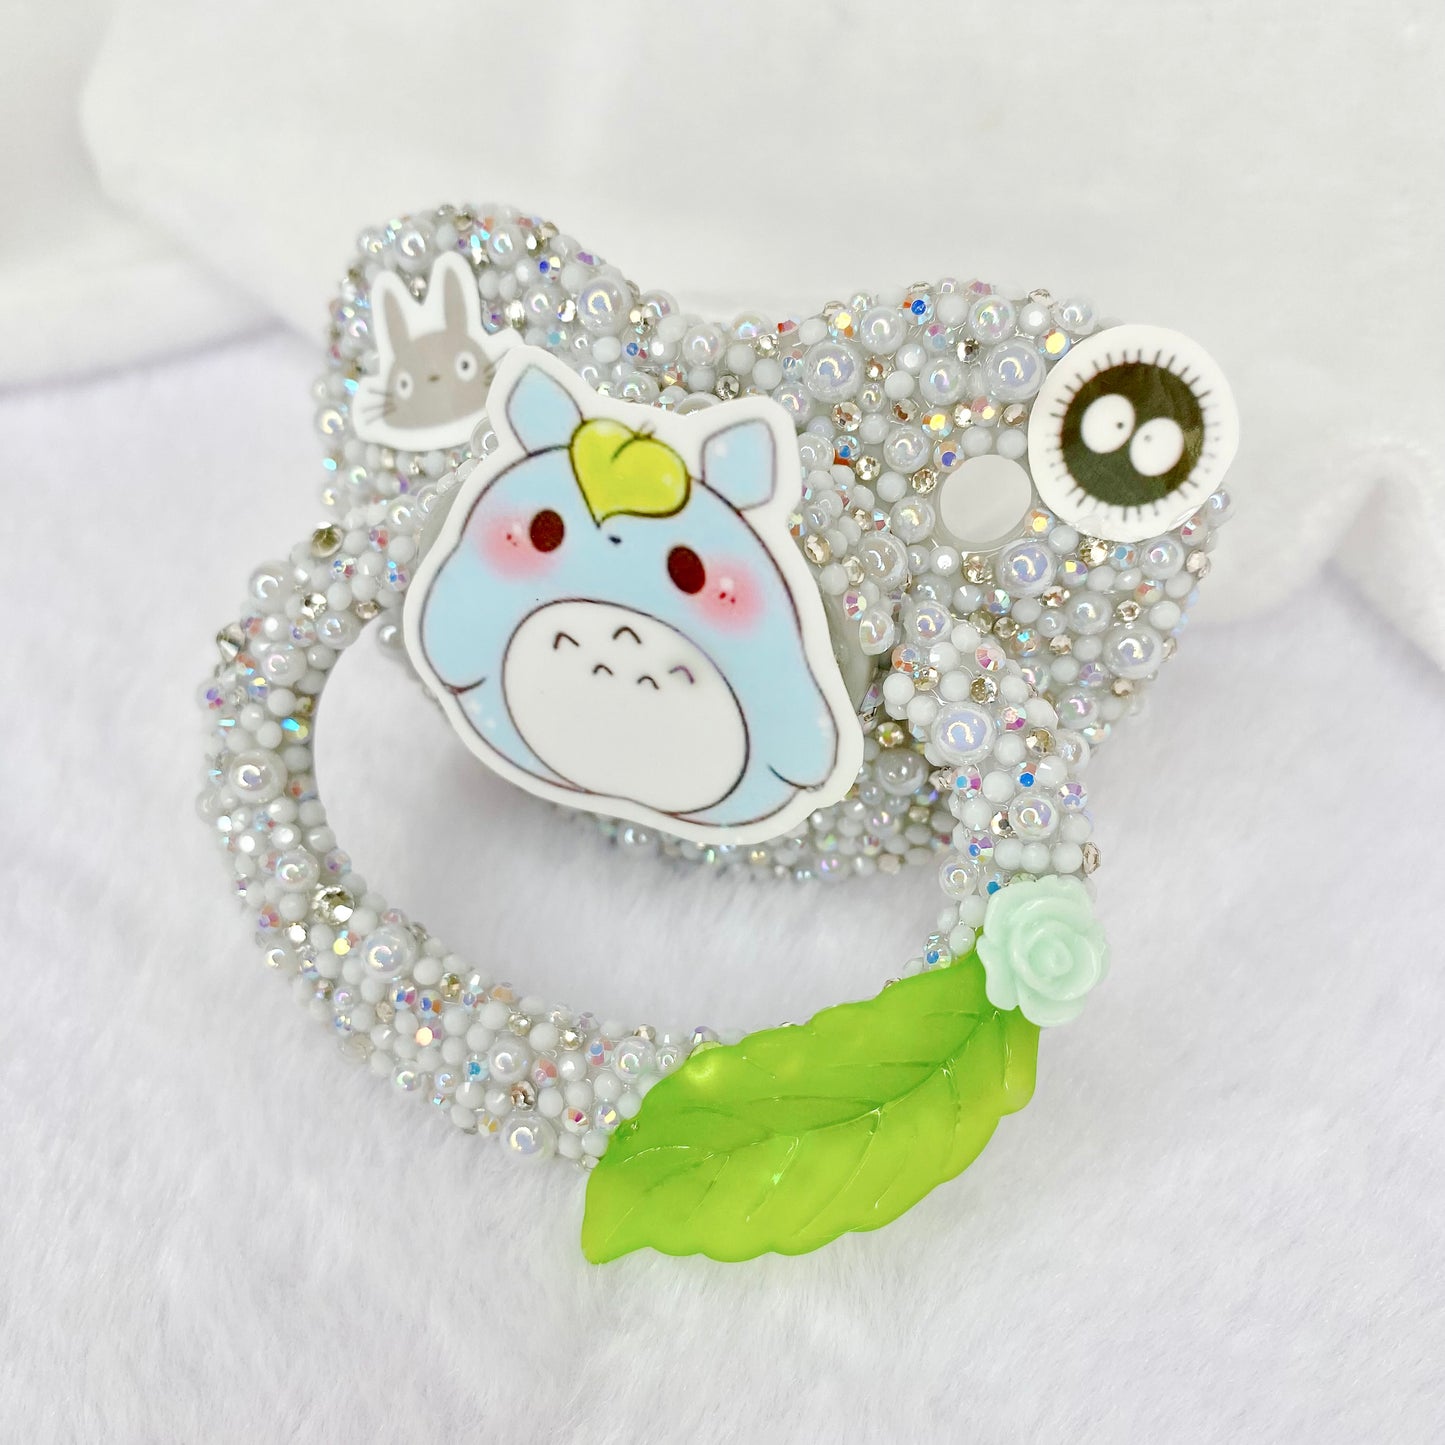 Tiny Totoro - Adult pacifier